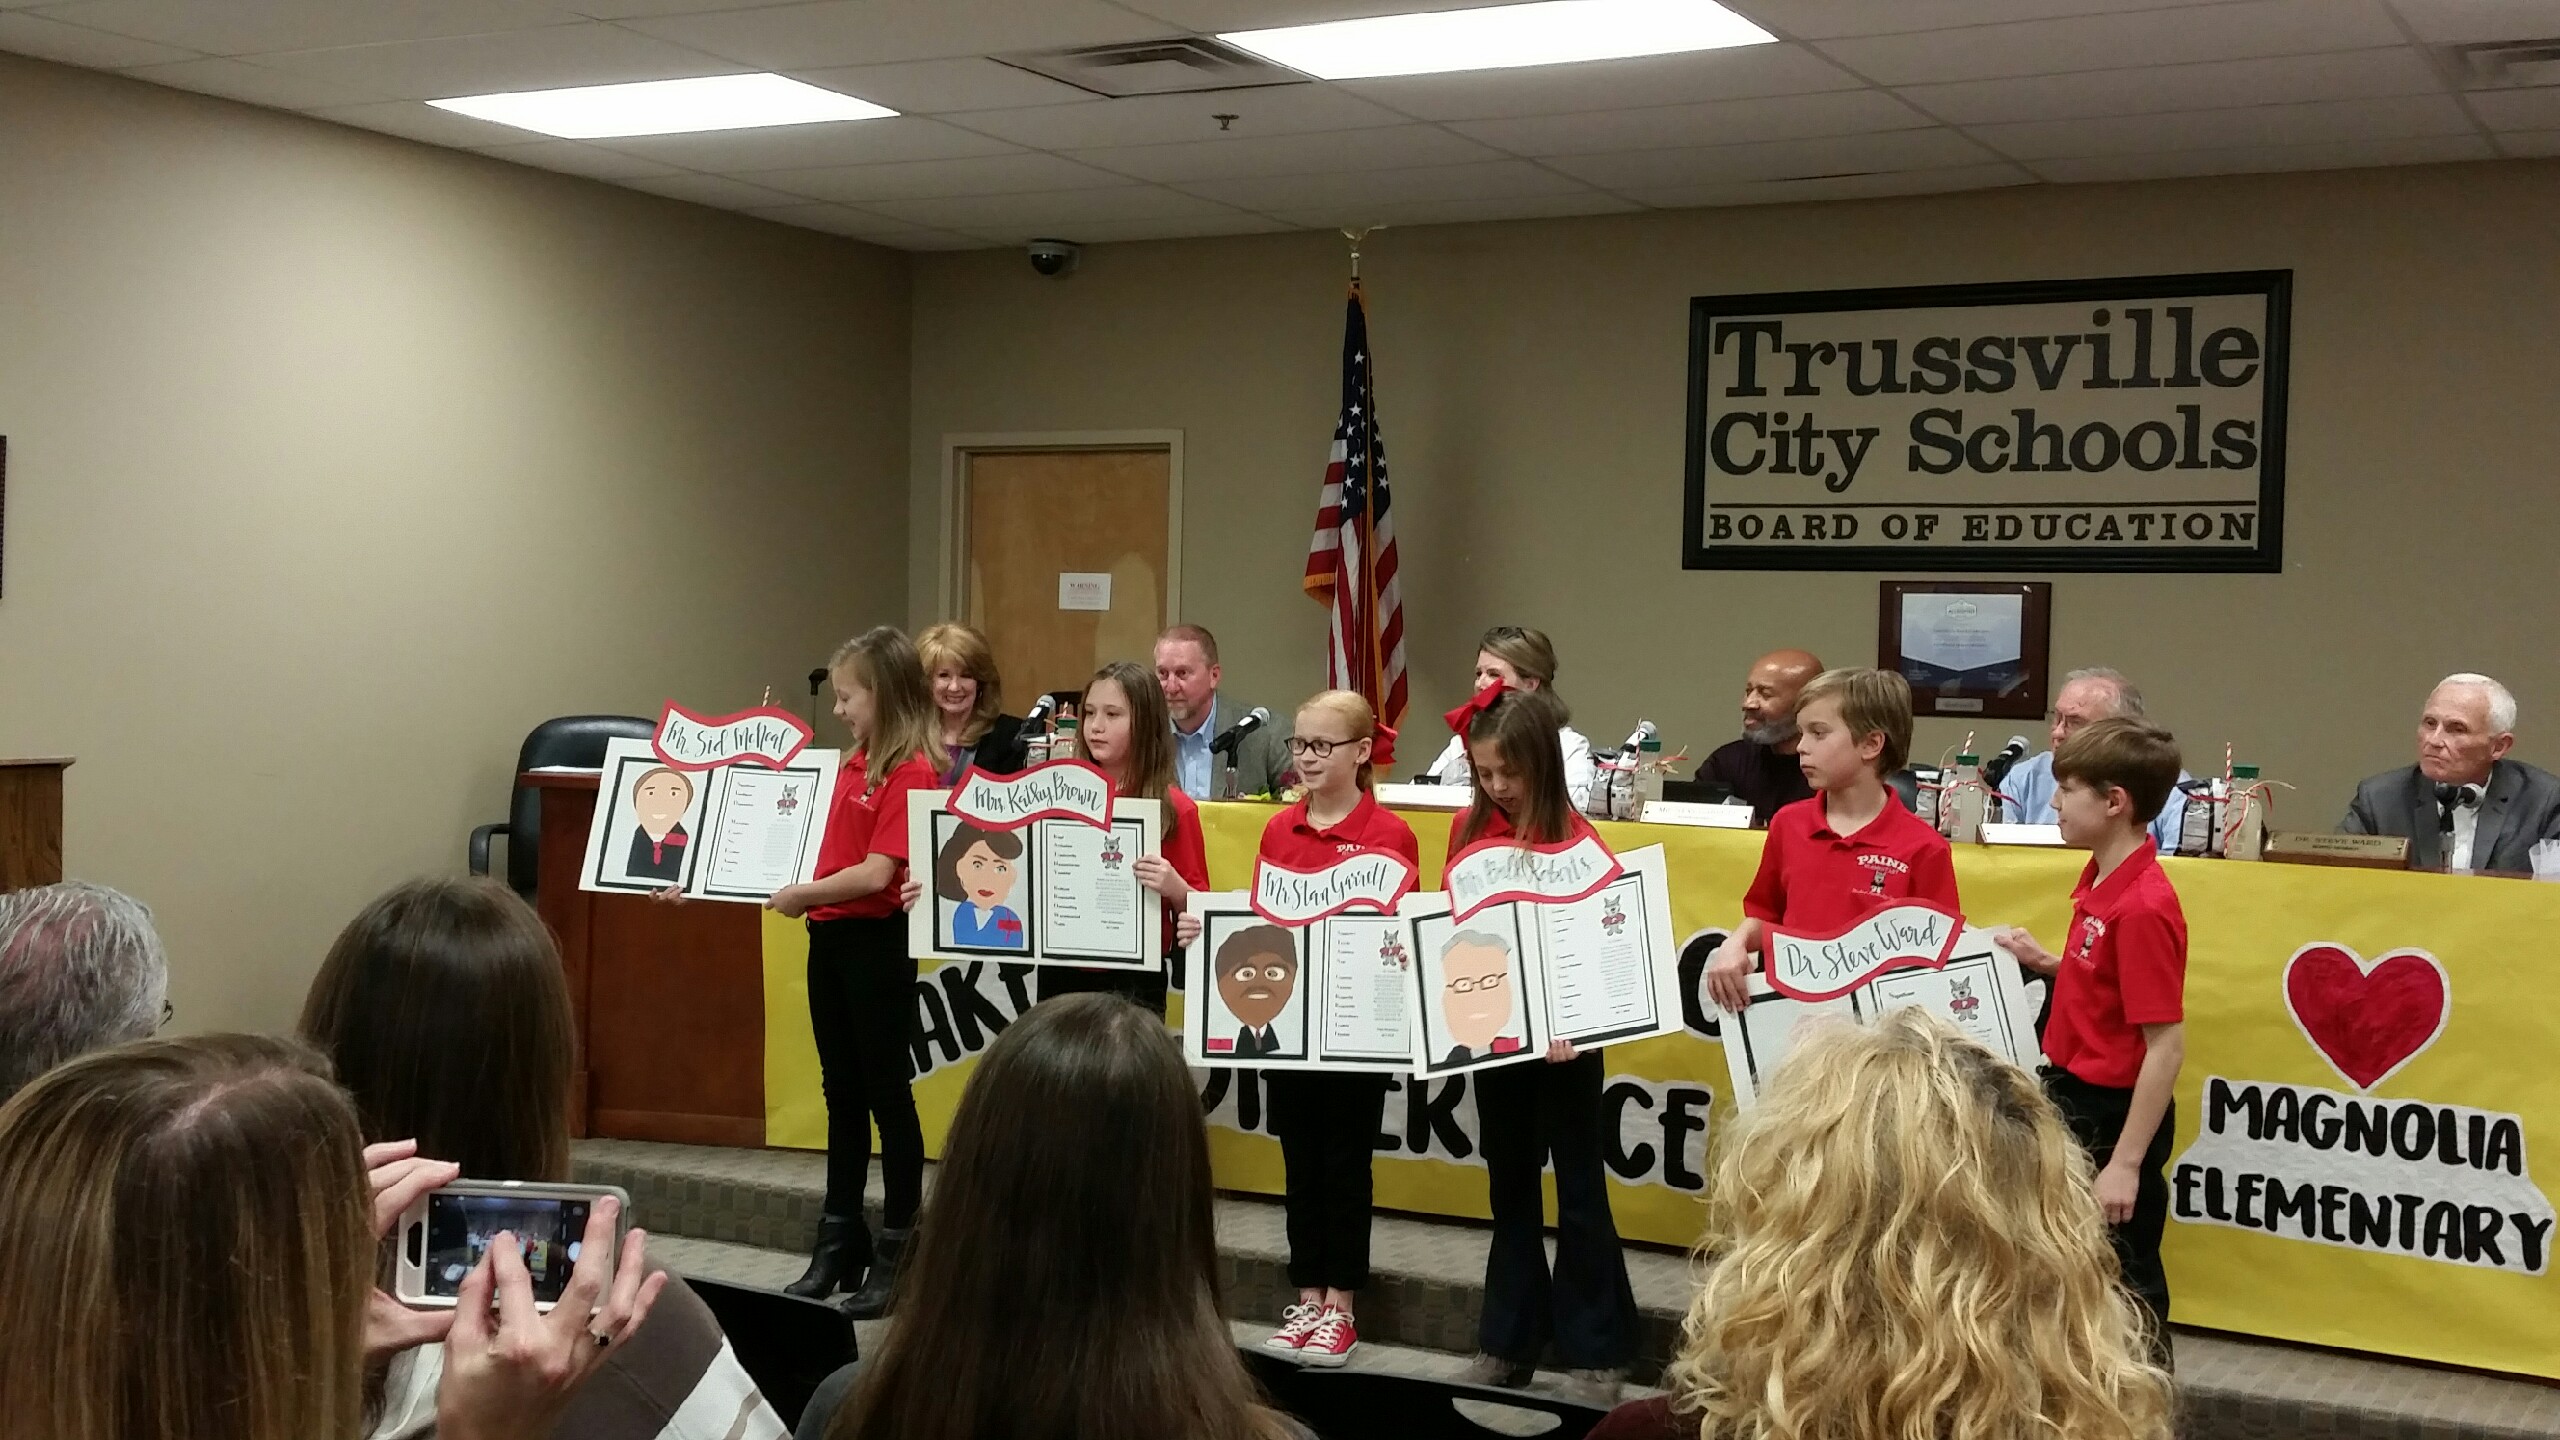 Students honor Trussville City Schools board members